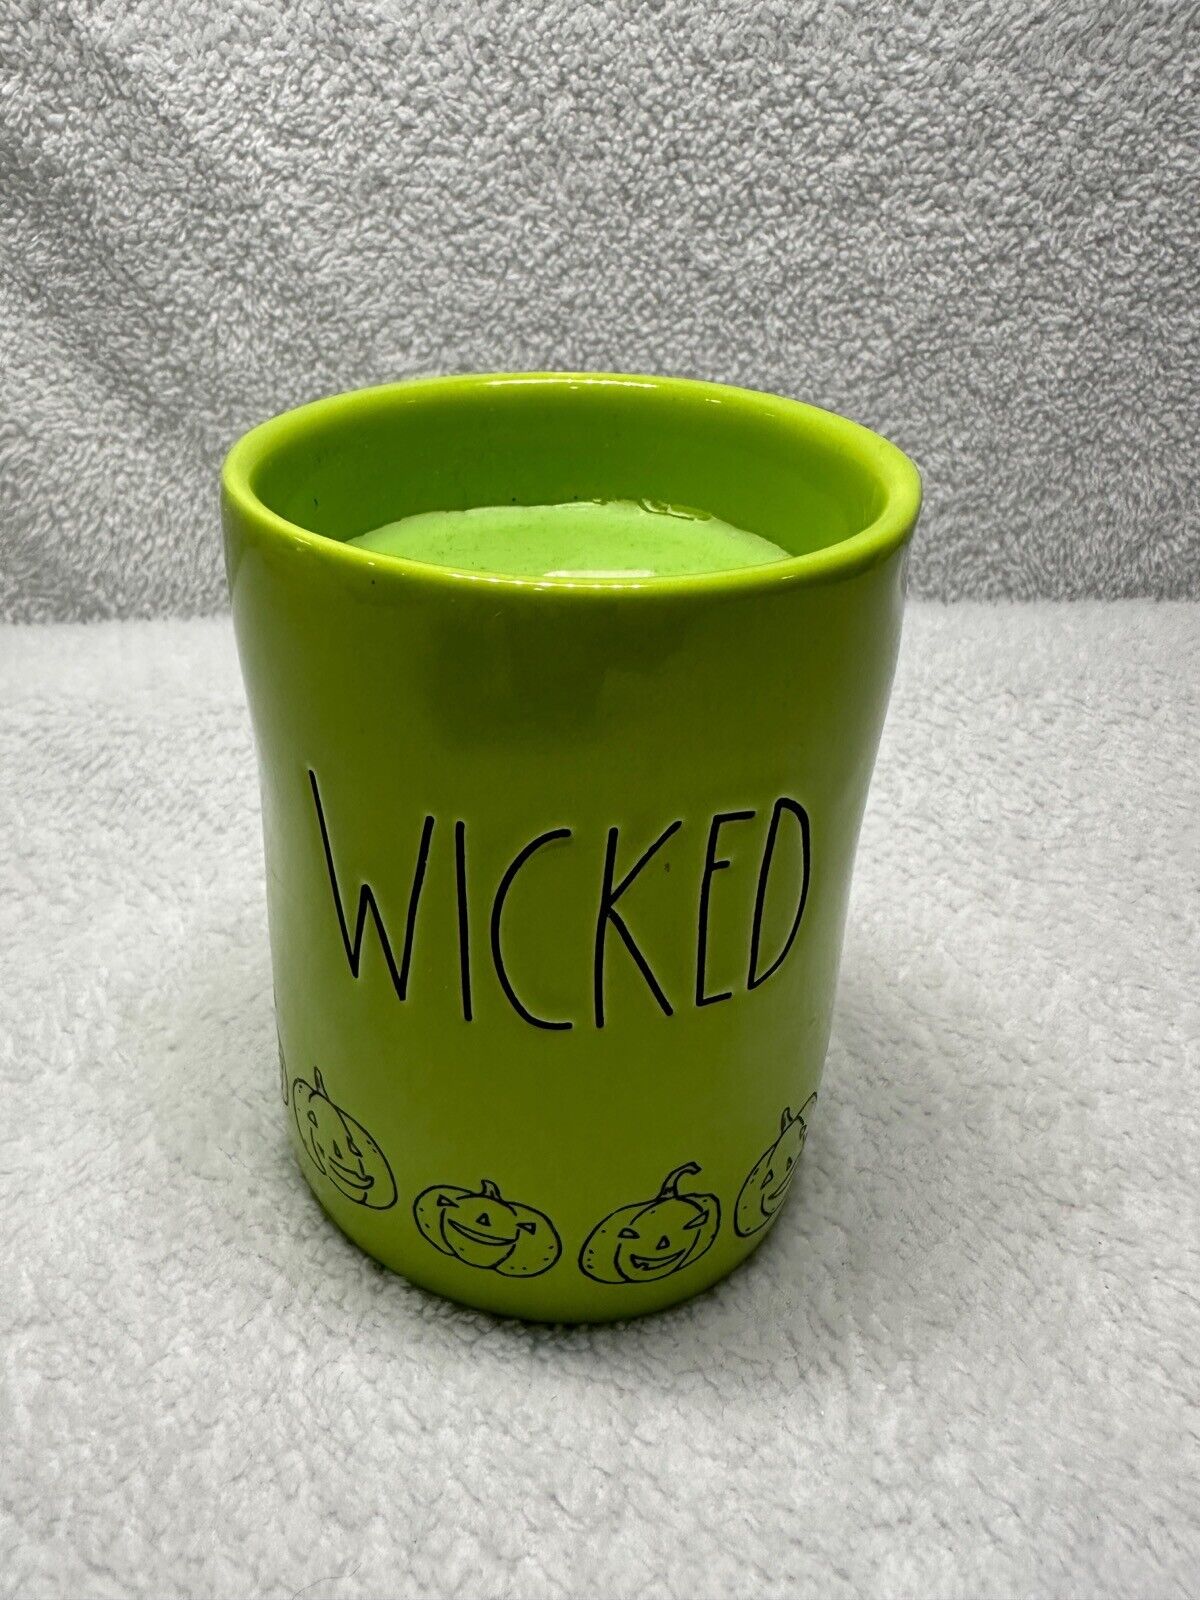 Rae Dunn Halloween Jack-O-Lantern Wicked Sublime Lime 8.7oz Scented Candle New 